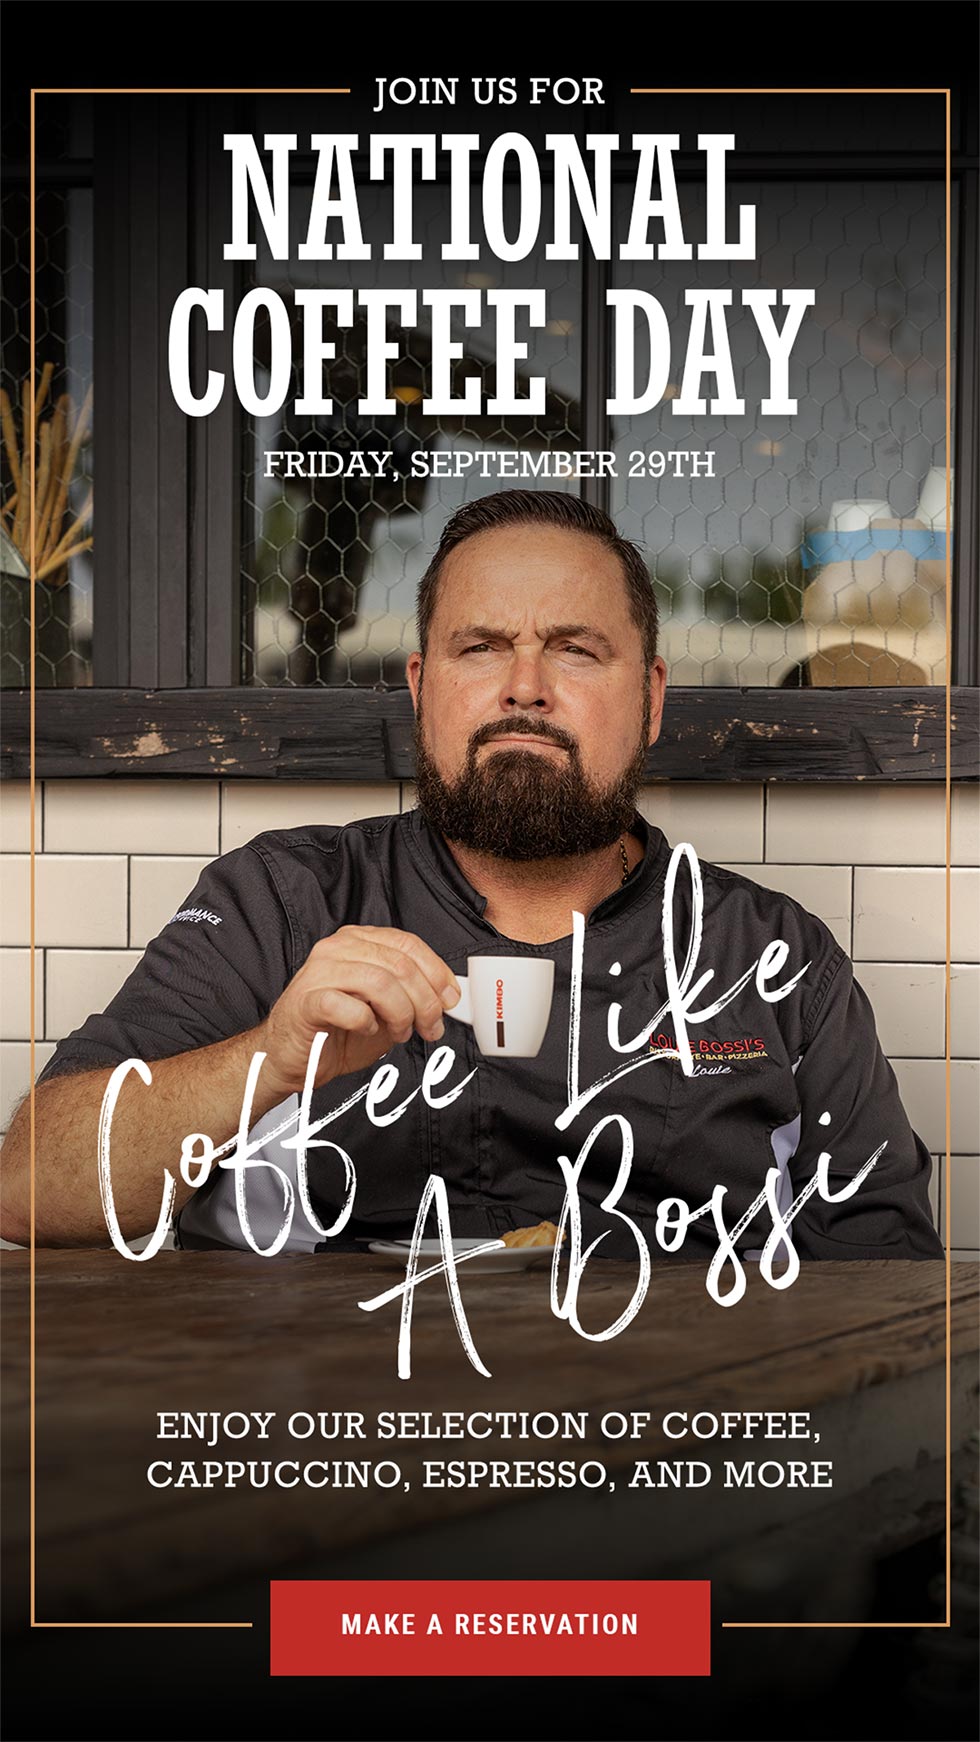 It's National Caffe Day at Louie Bossi